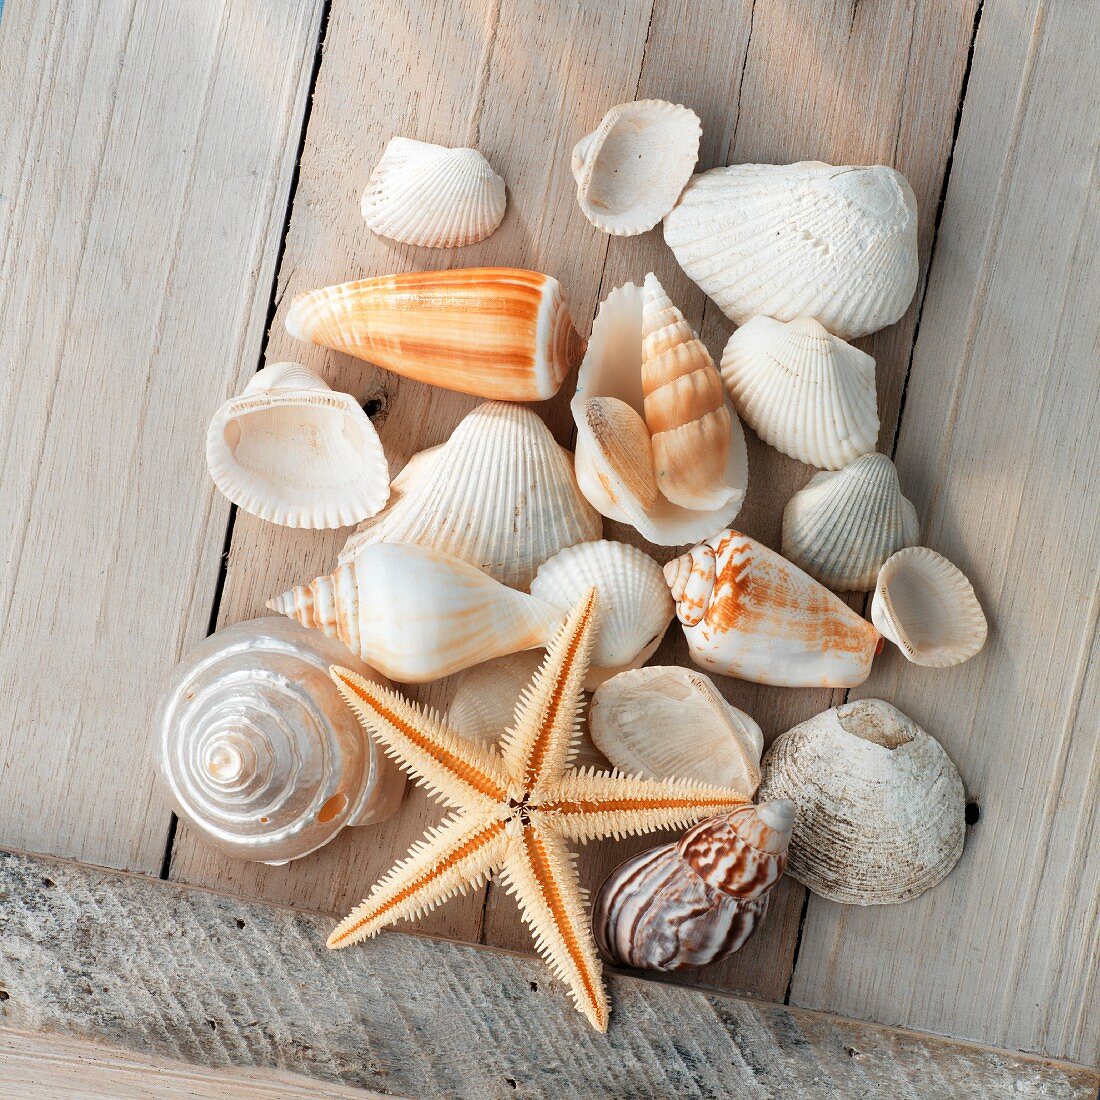 Sea shells on wooden surface